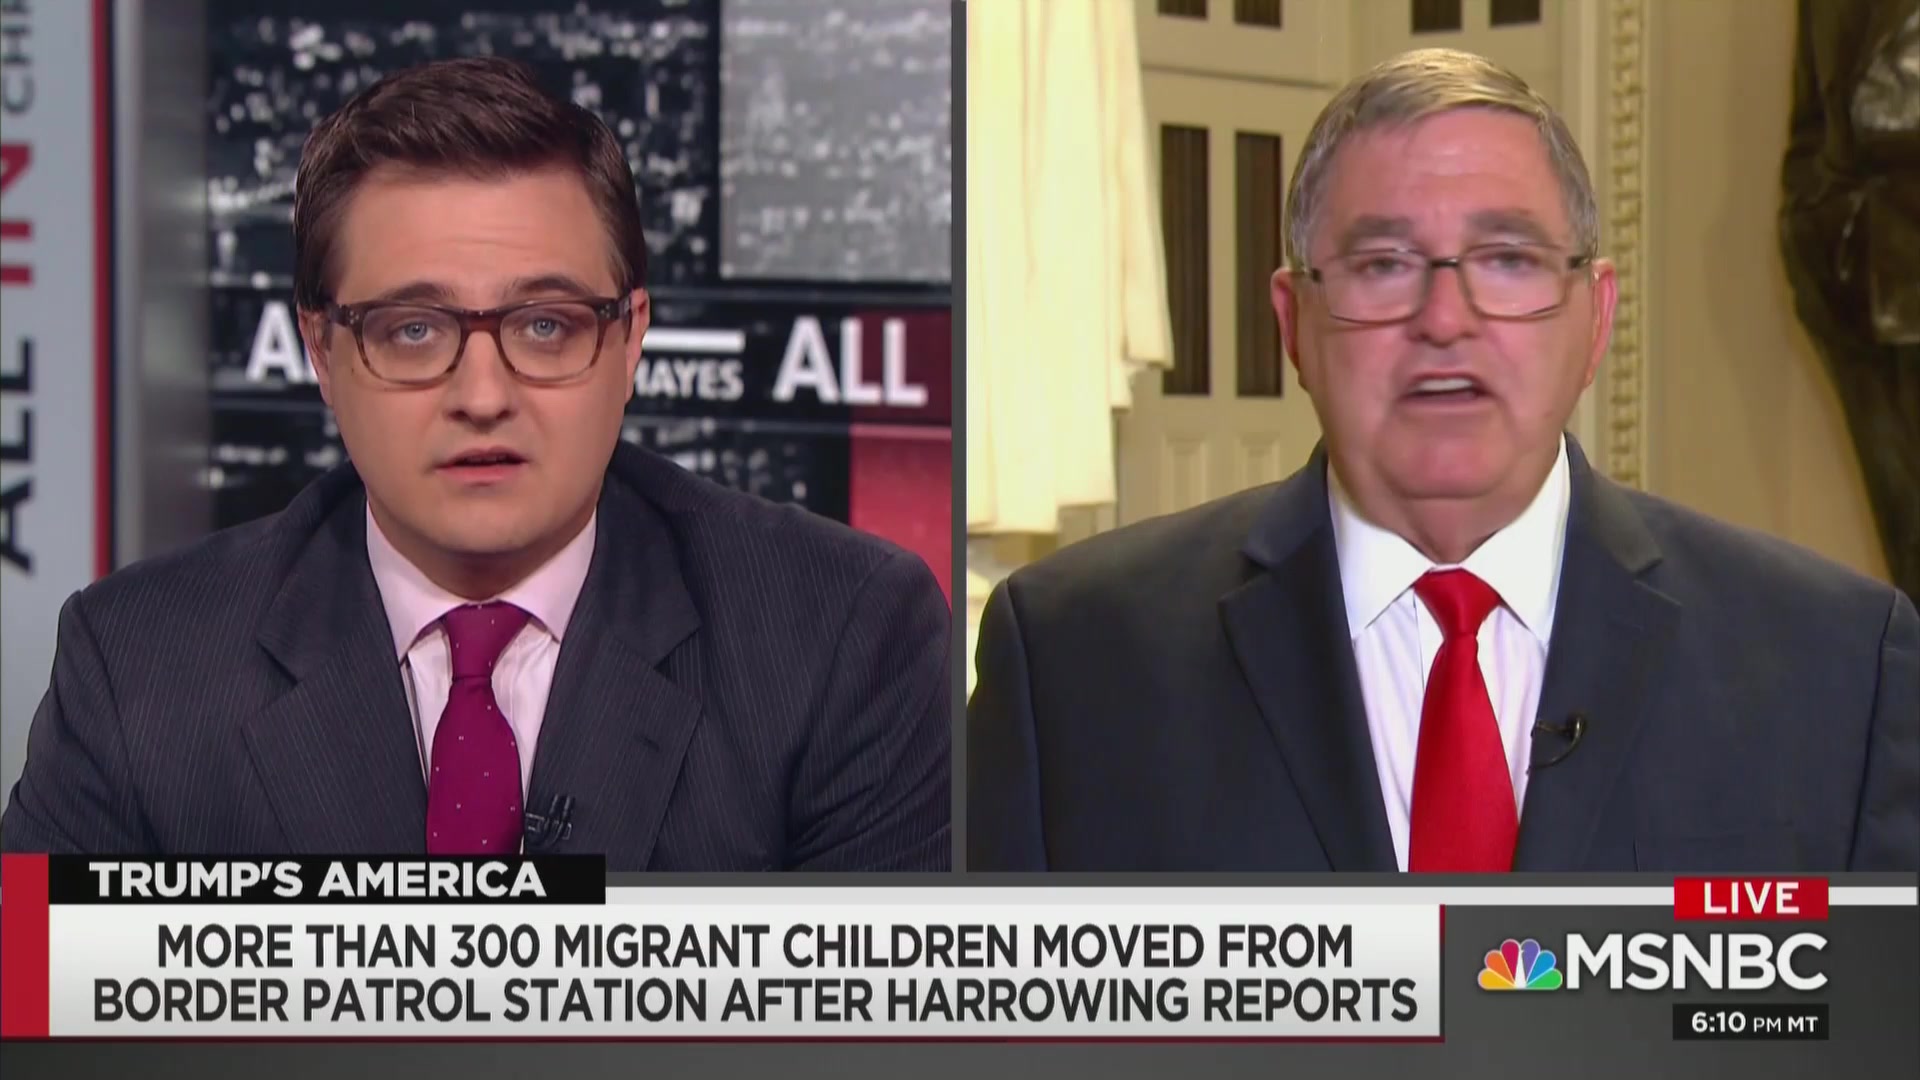 GOP Rep: Trump Hatred Might Be Behind Reports of Awful Conditions at Detention Centers